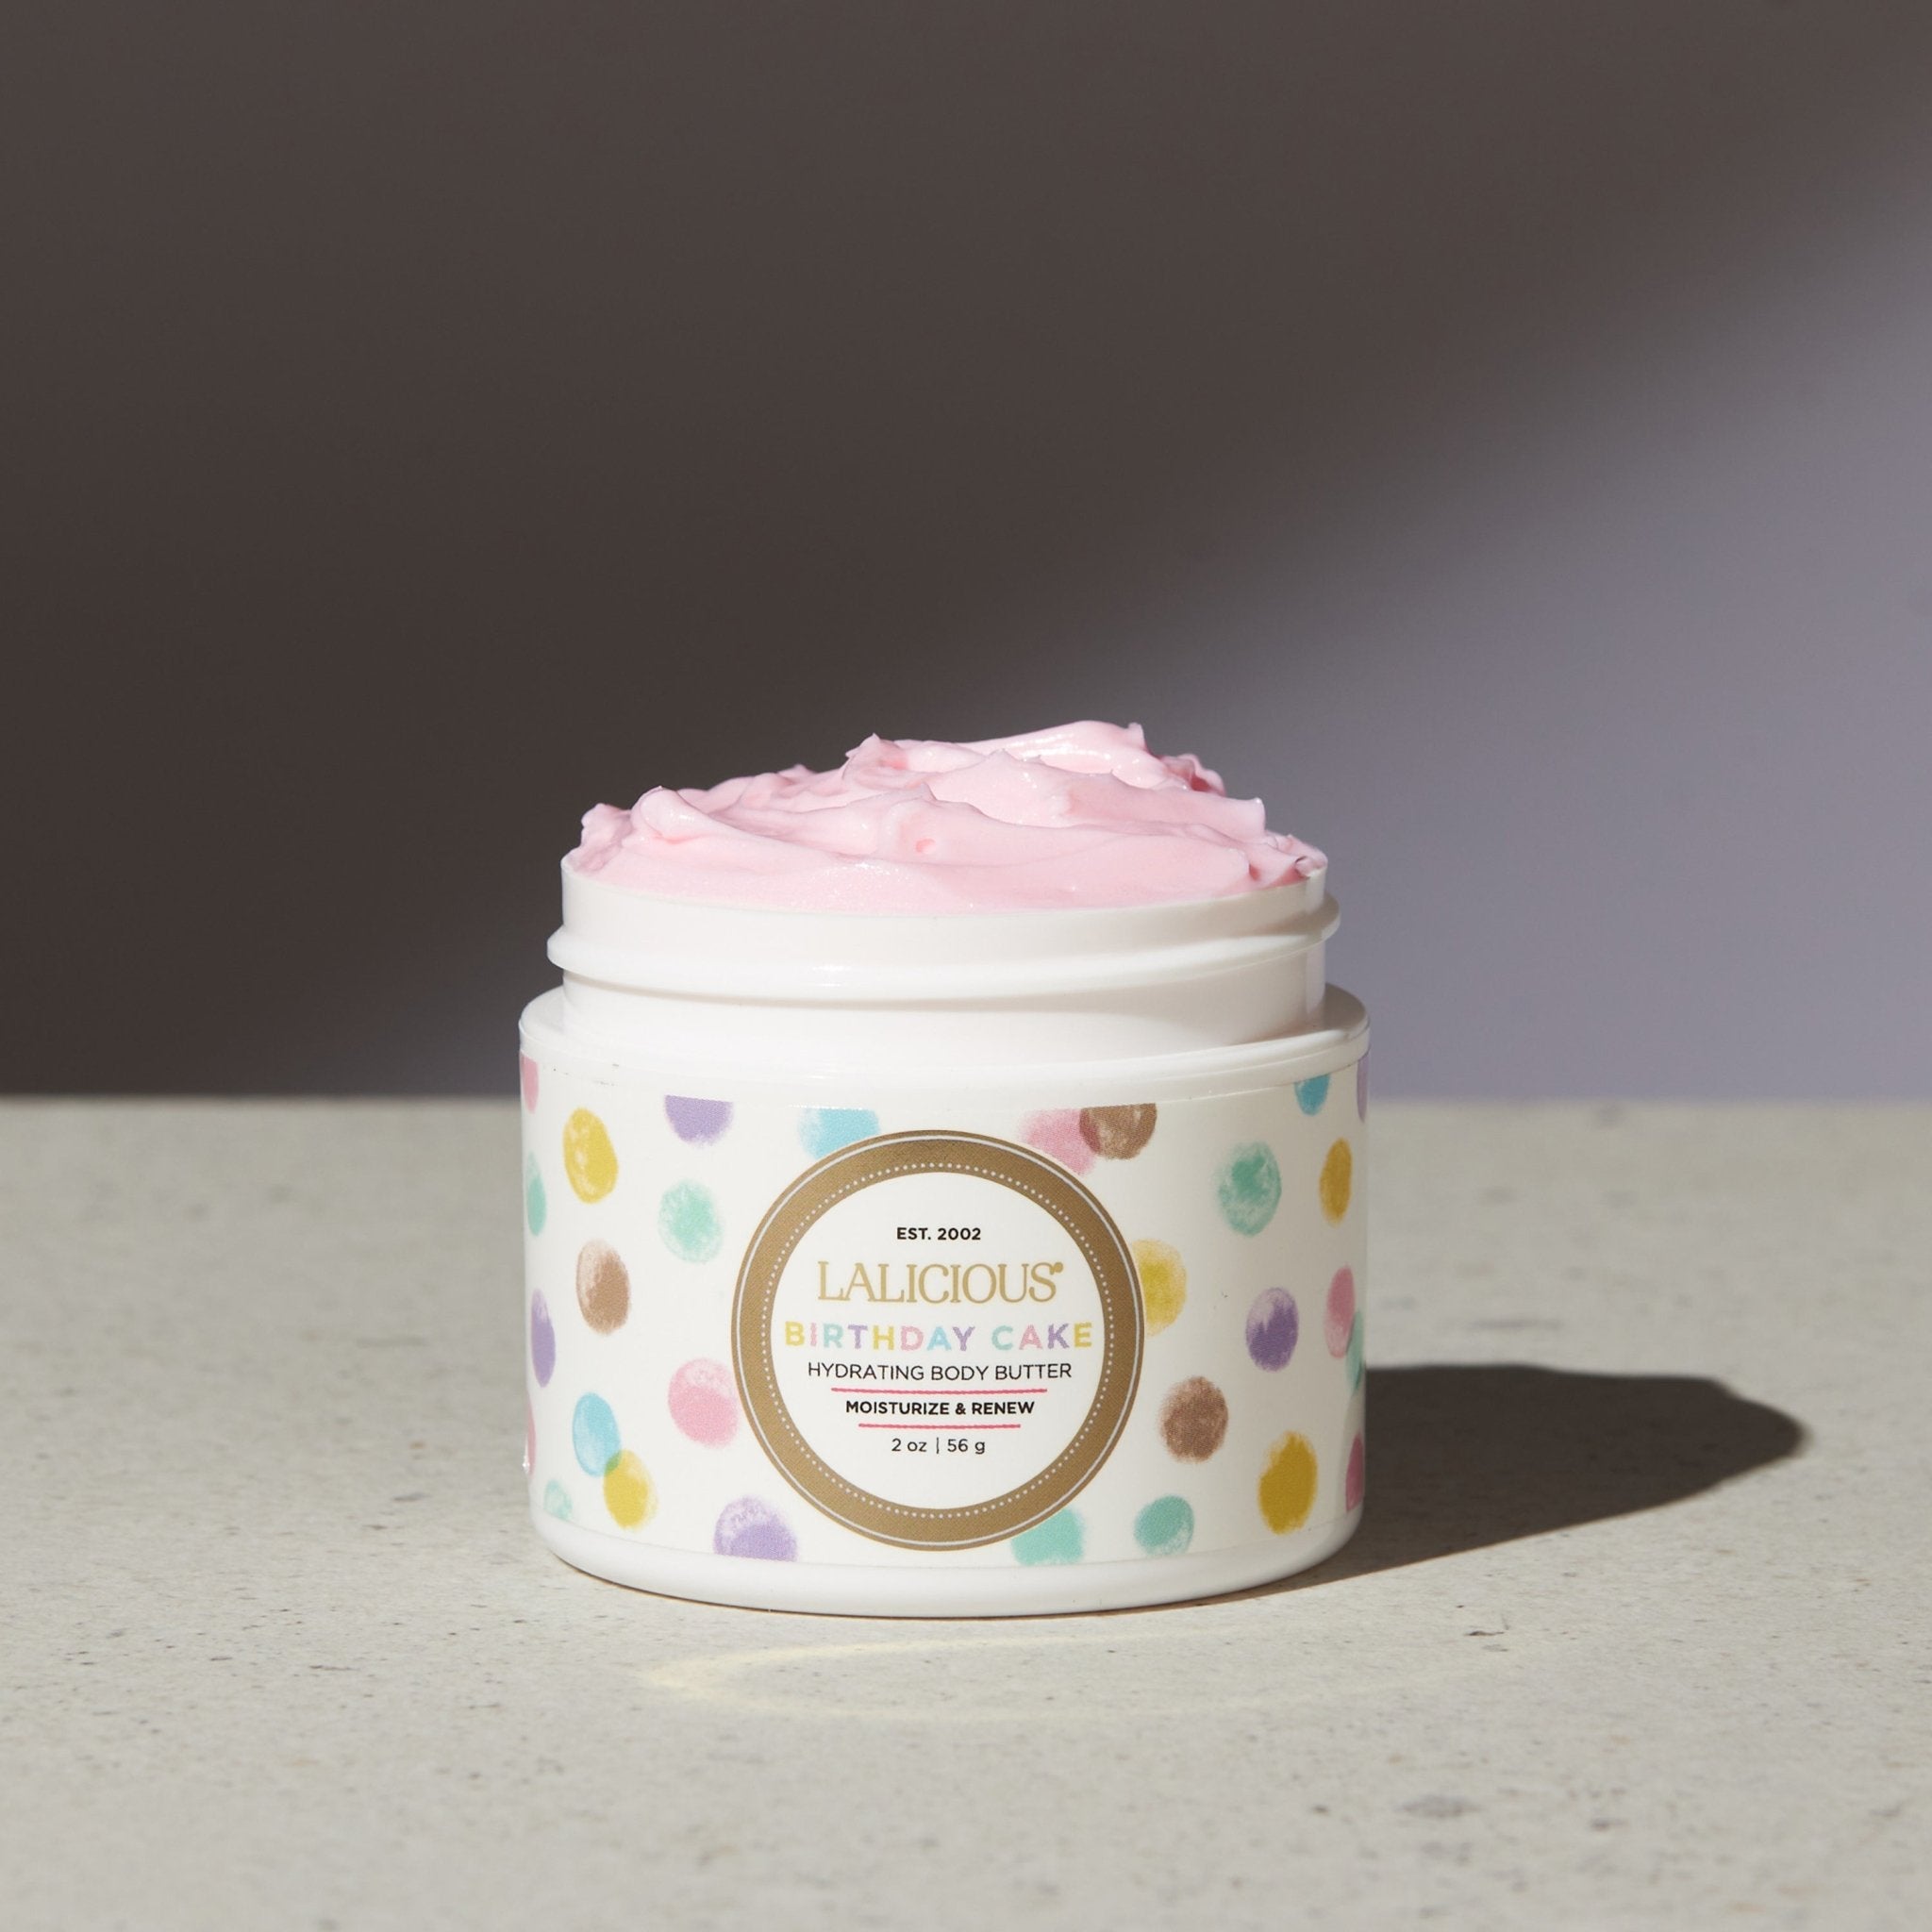 Birthday Cake Body Butter - LALICIOUS